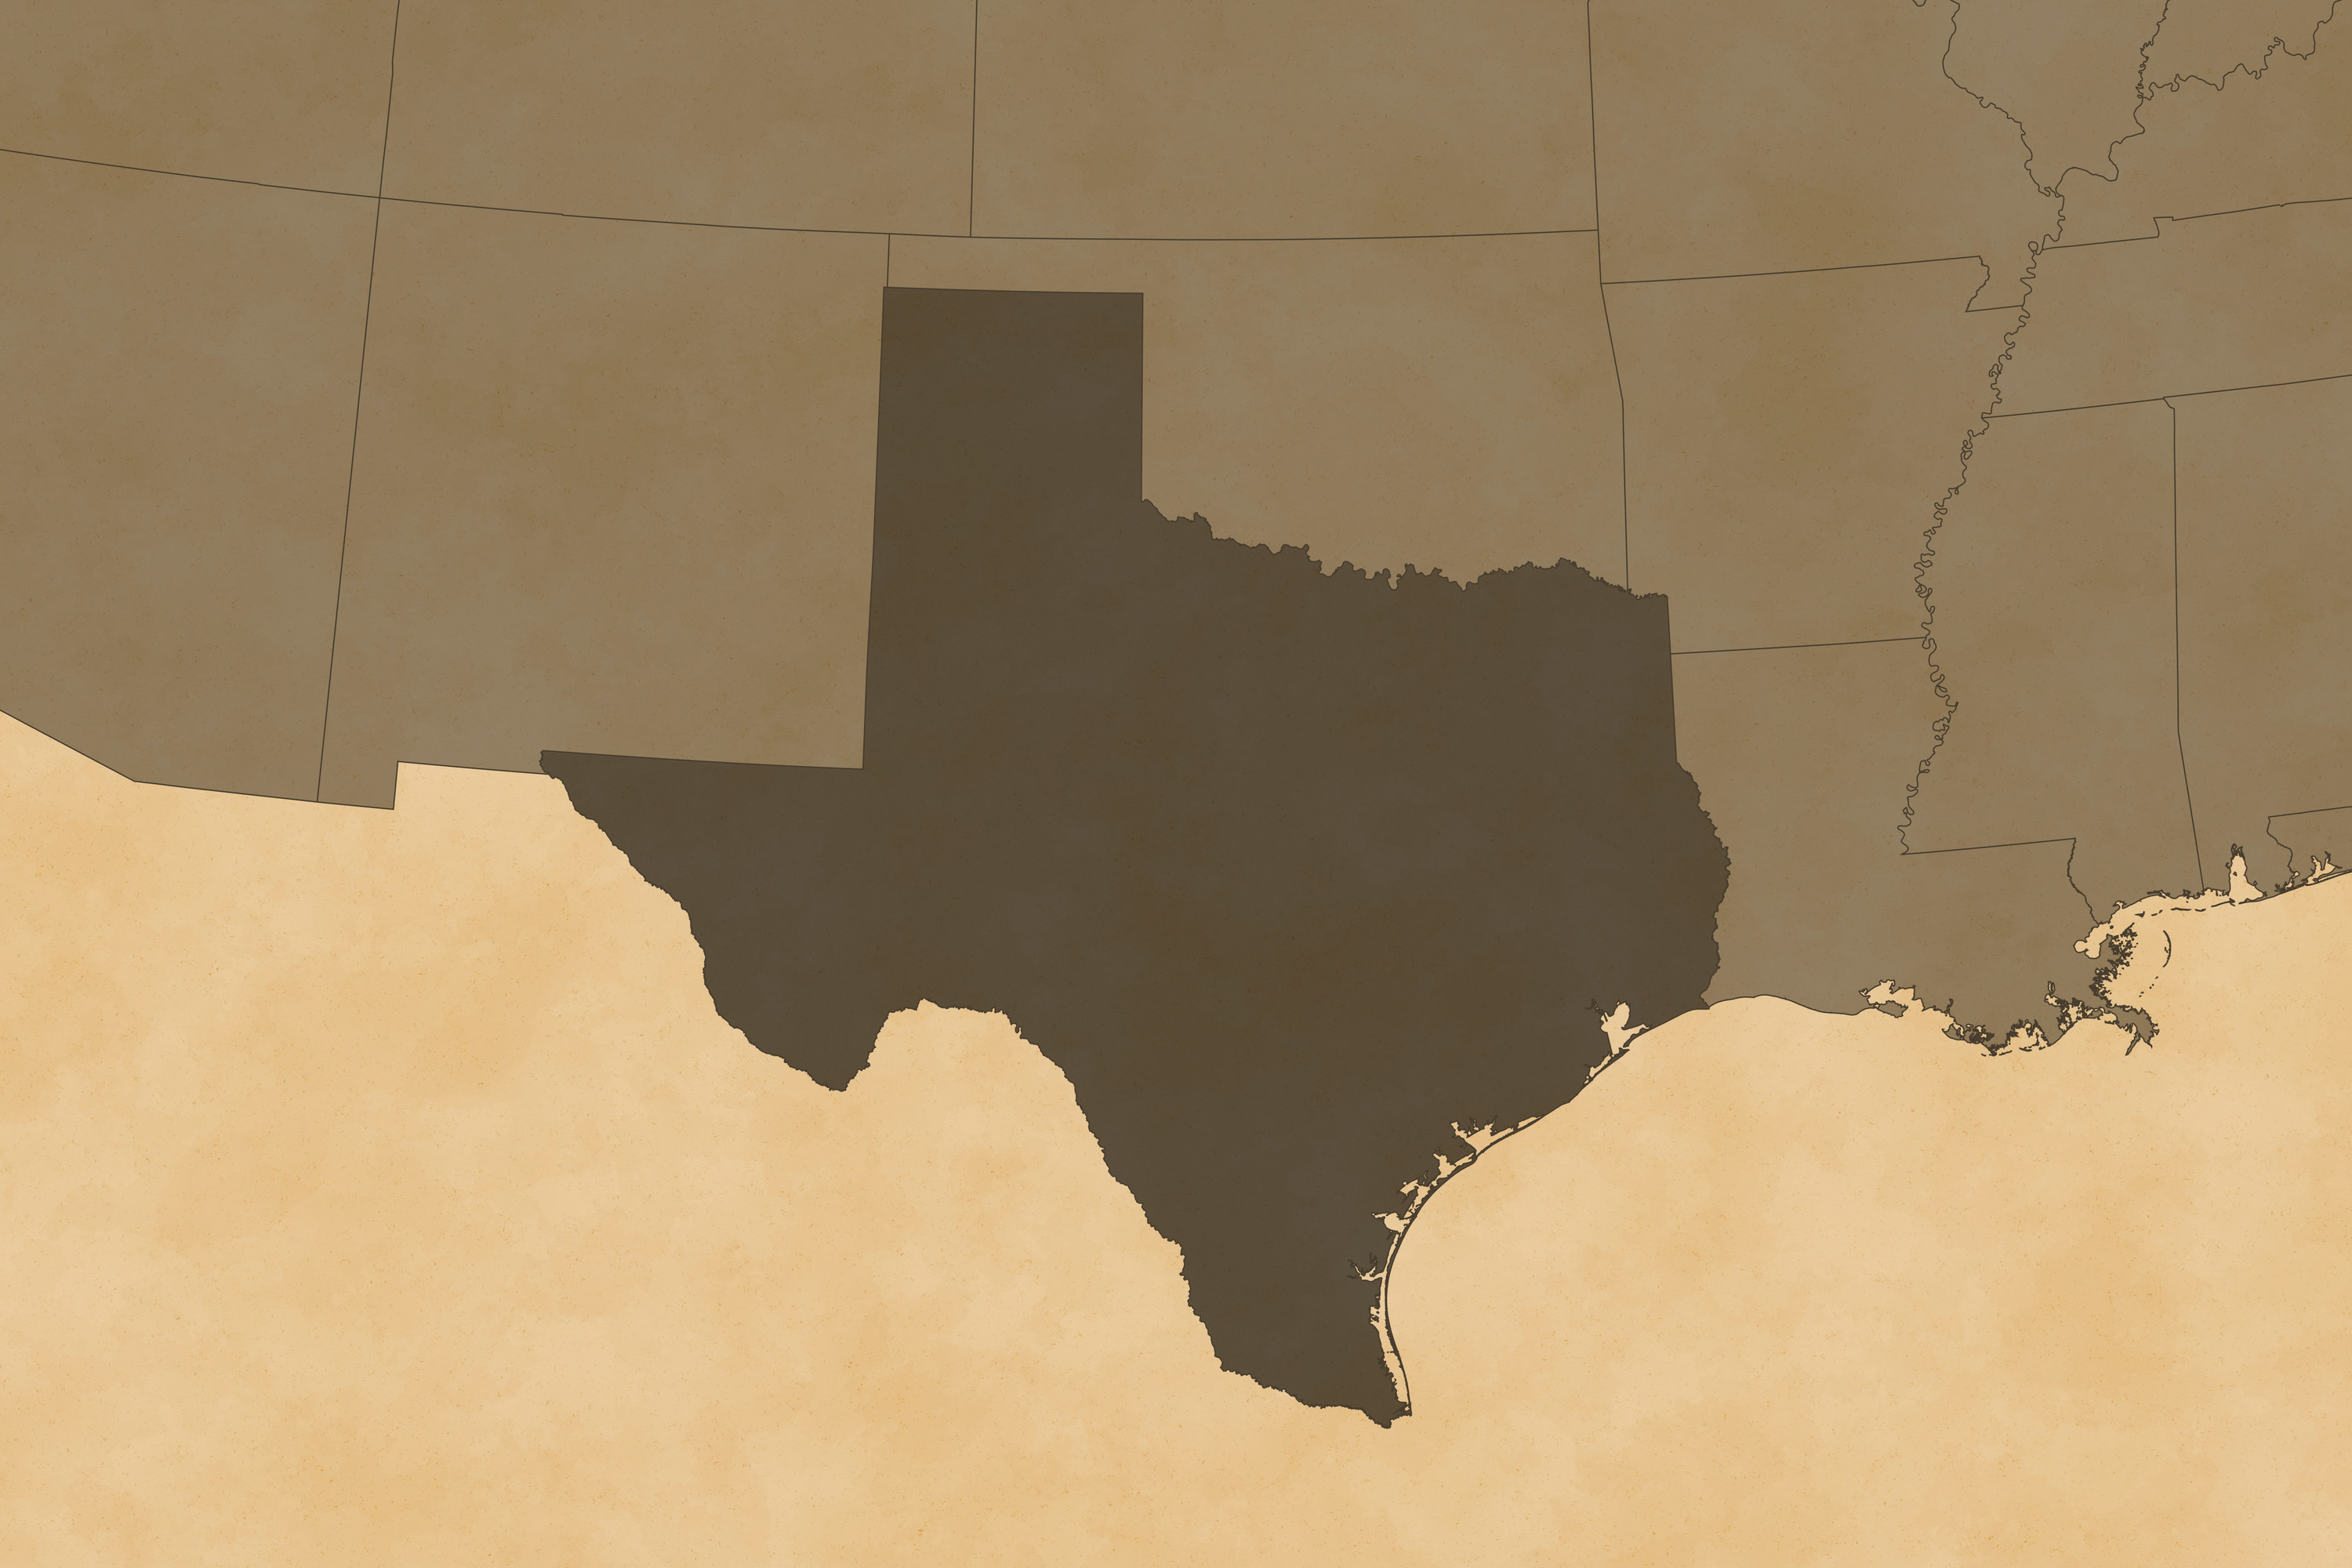 A closeup of Texas on the map